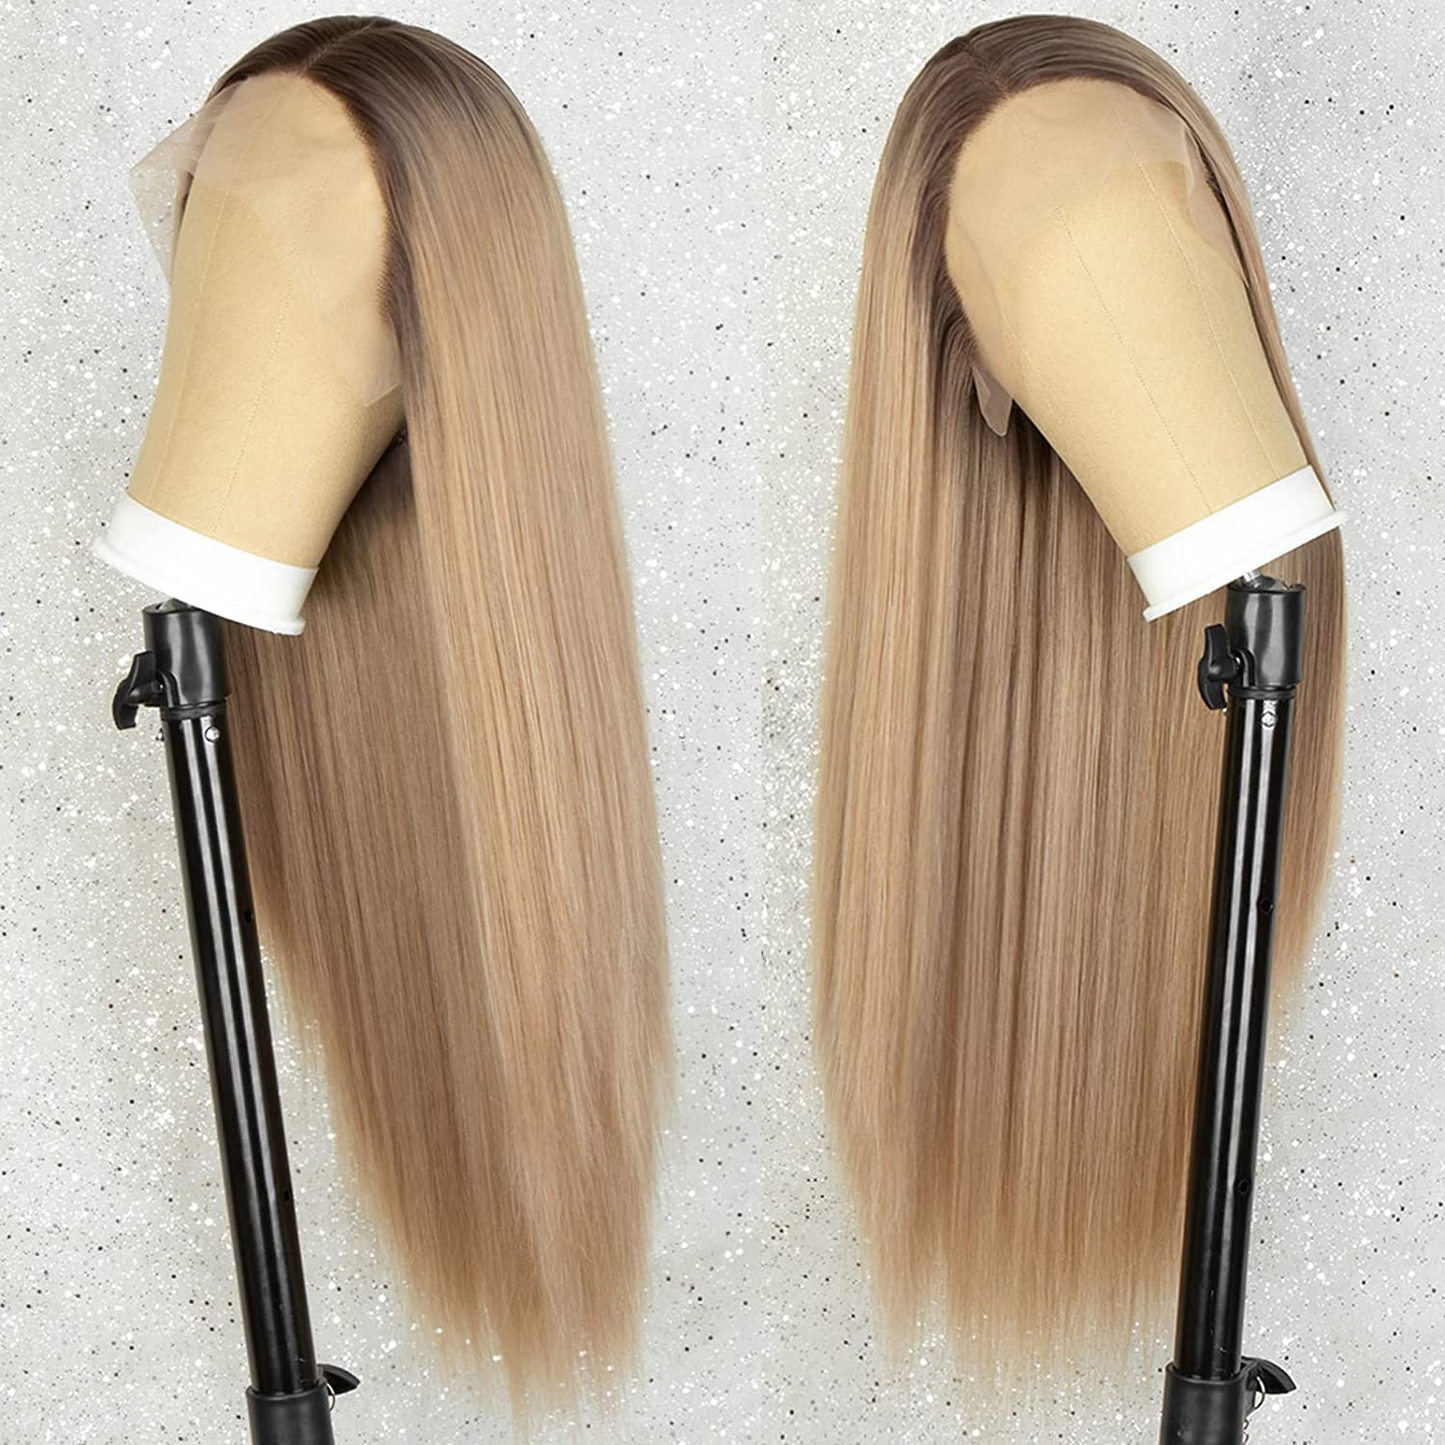 Ombre Blonde Lace Front Wigs for Women |22 Inches DragQueen13x3 Lace Wig 